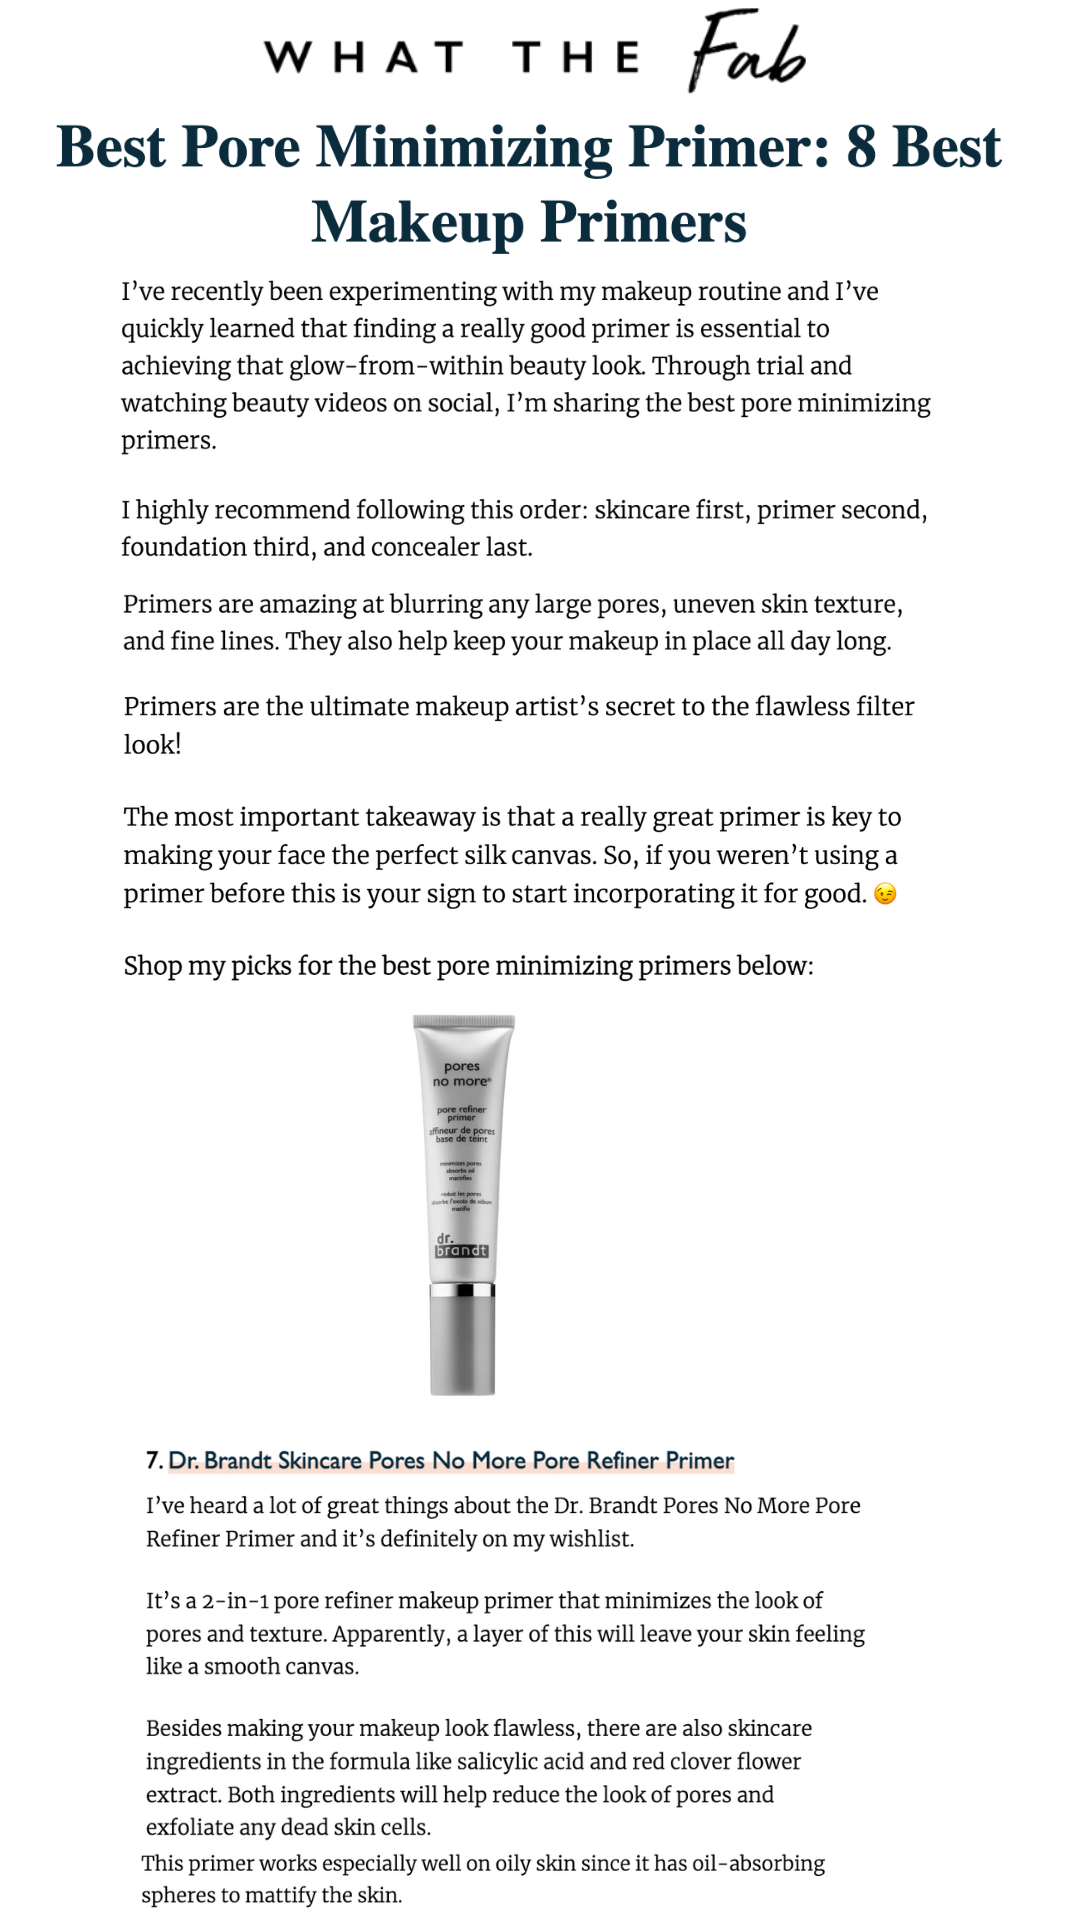 Best Pore Minimizing Primer: 8 Best Makeup Primers in What The Fab